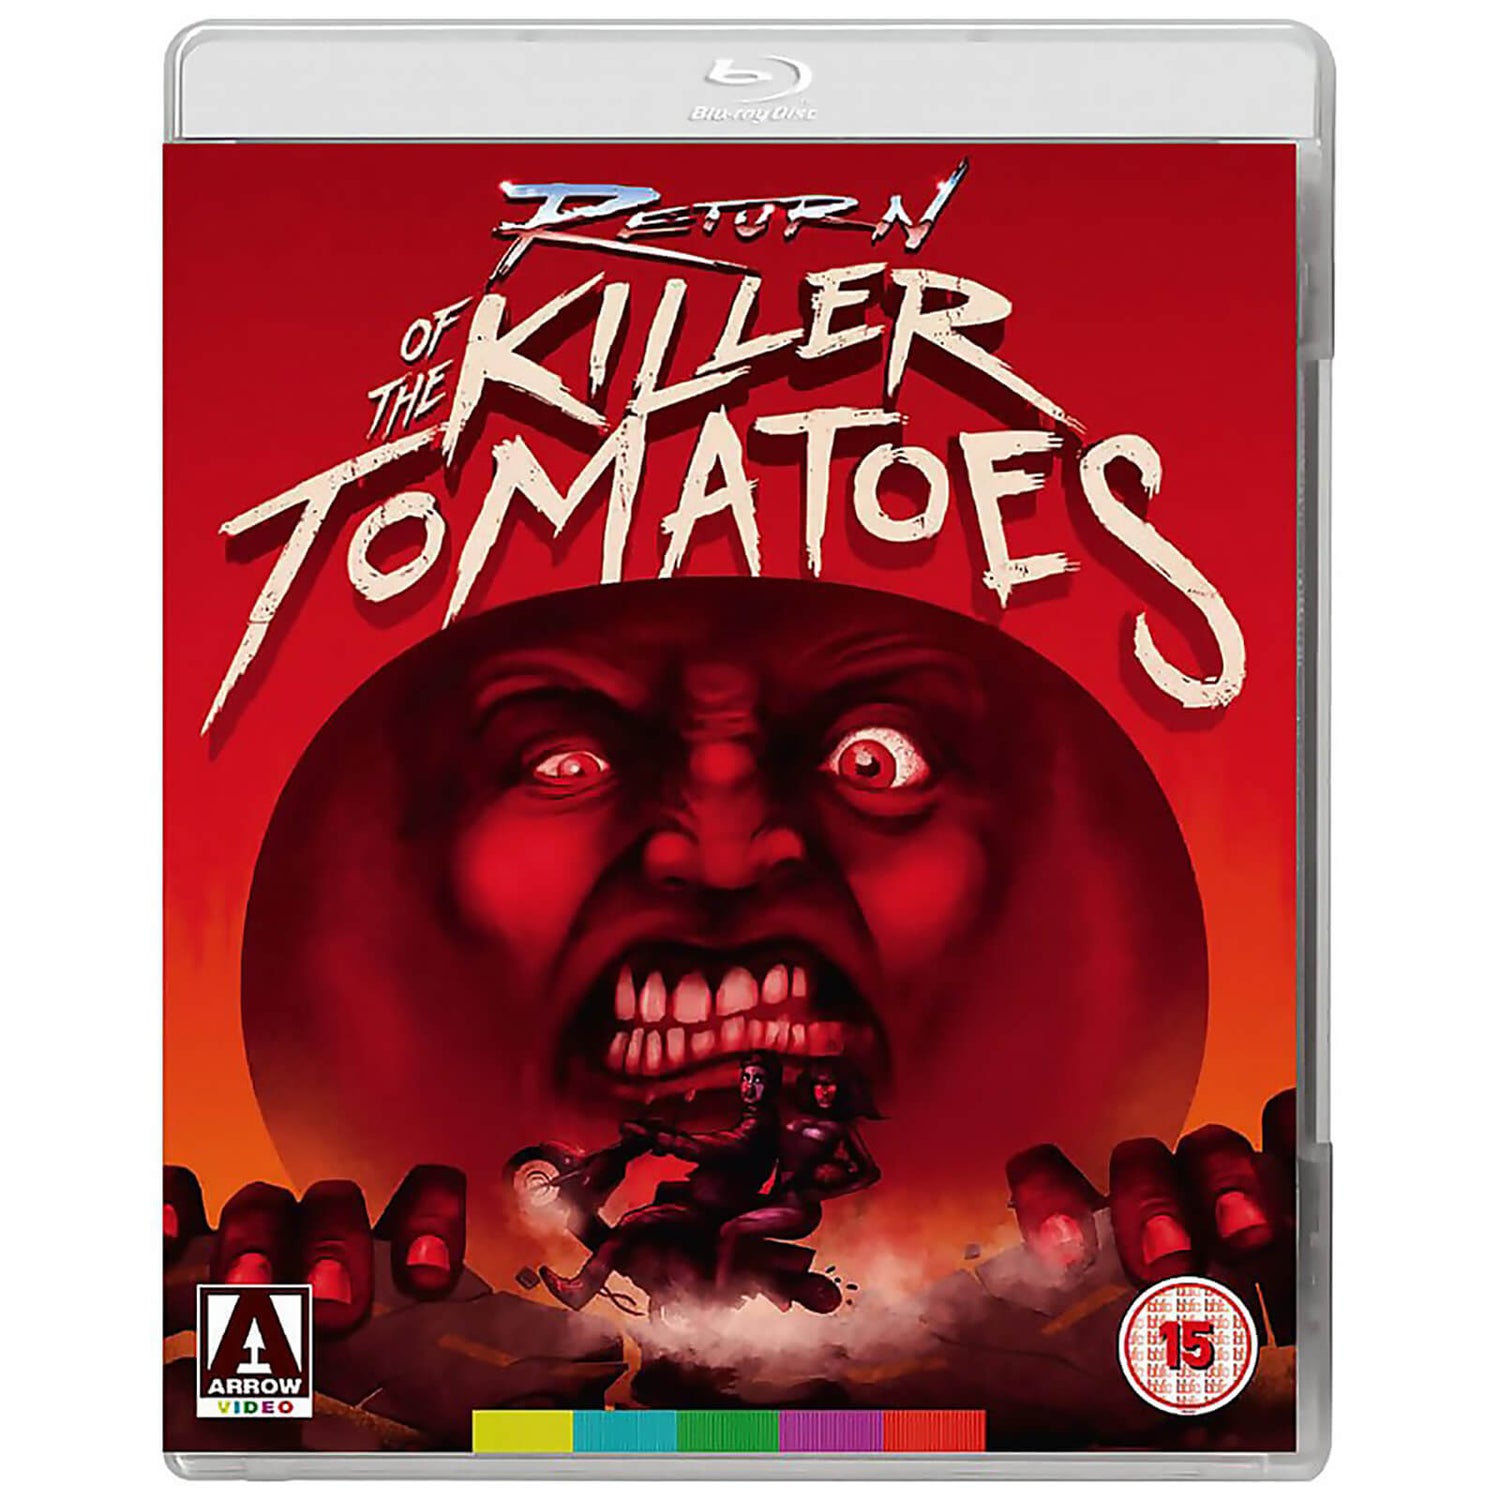 Return of the Killer Tomatoes - Dual Format (Includes DVD)